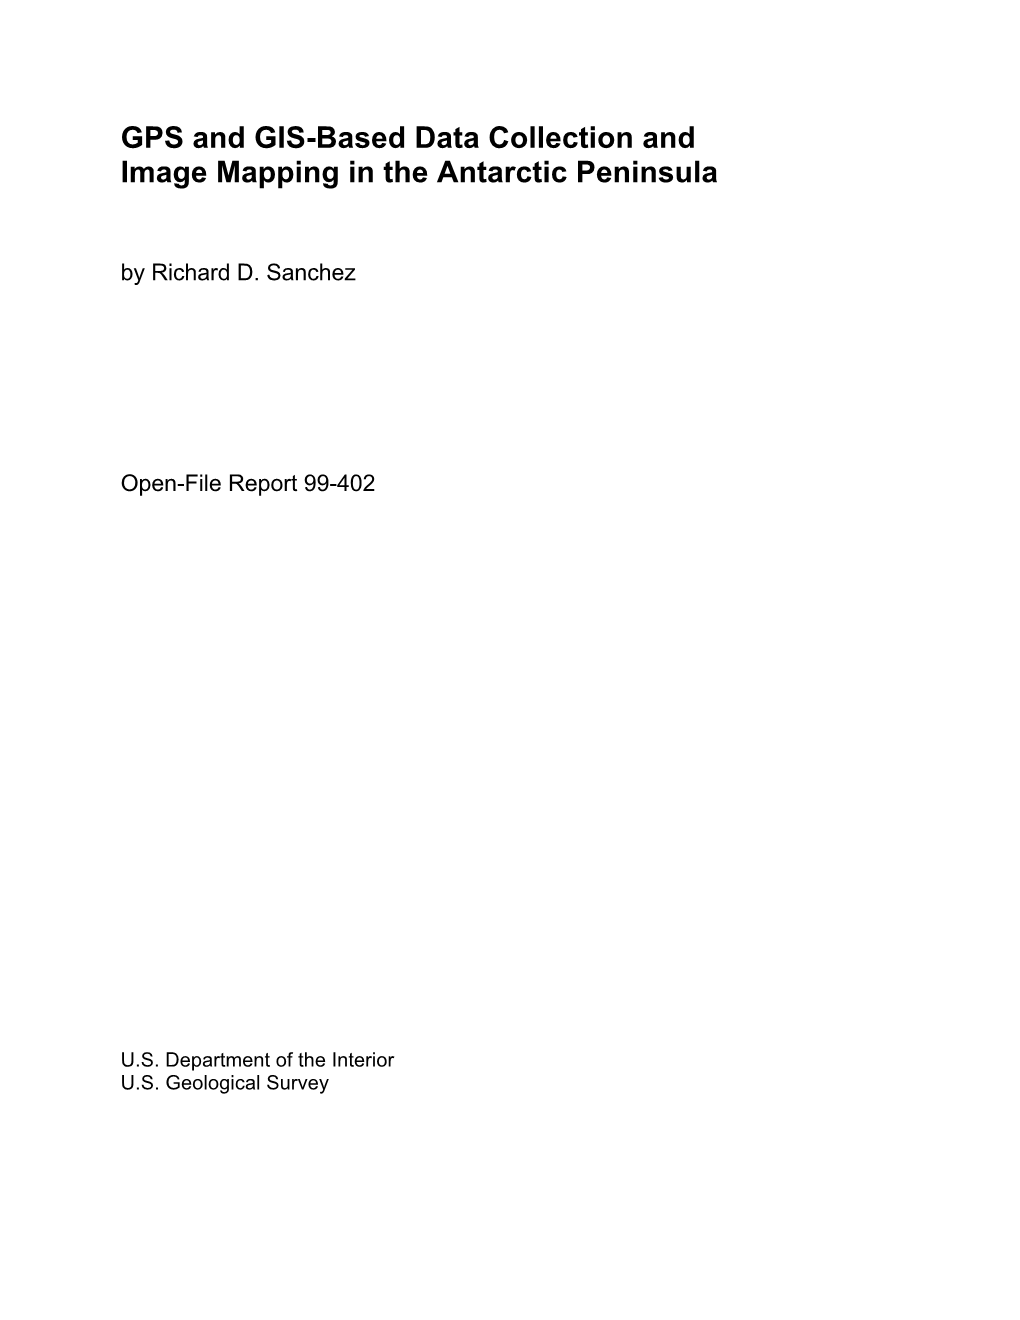 GPS and GIS-Based Data Collection and Image Mapping in the Antarctic Peninsula